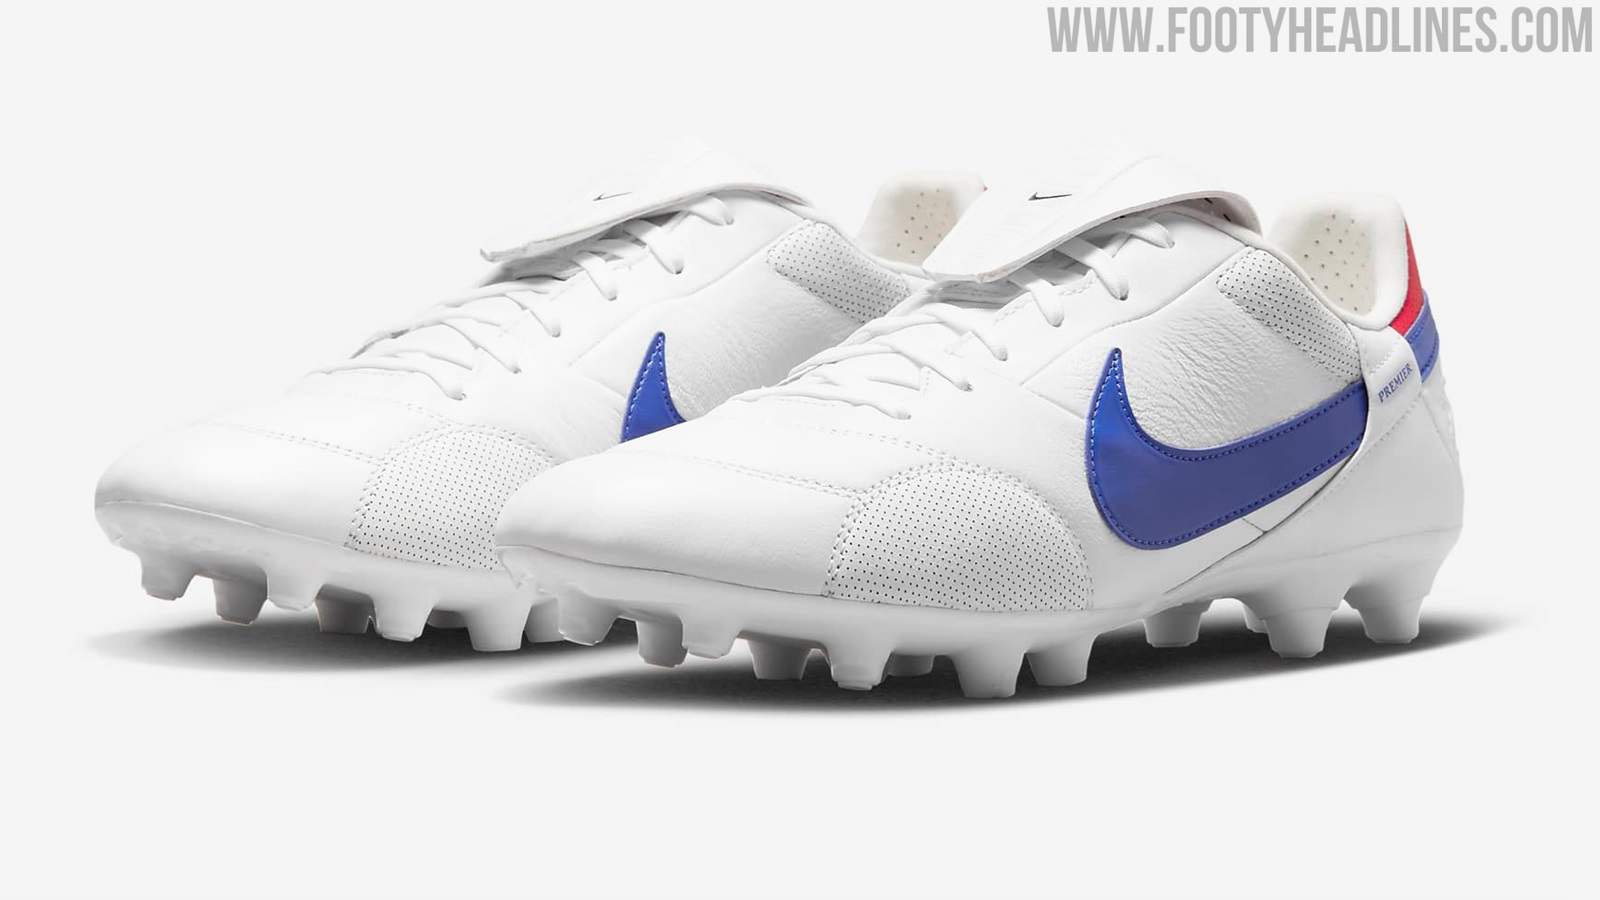 White/Red/Blue Nike III Boots Released - One of Last-Ever to Have Kangaroo Leather - Footy Headlines